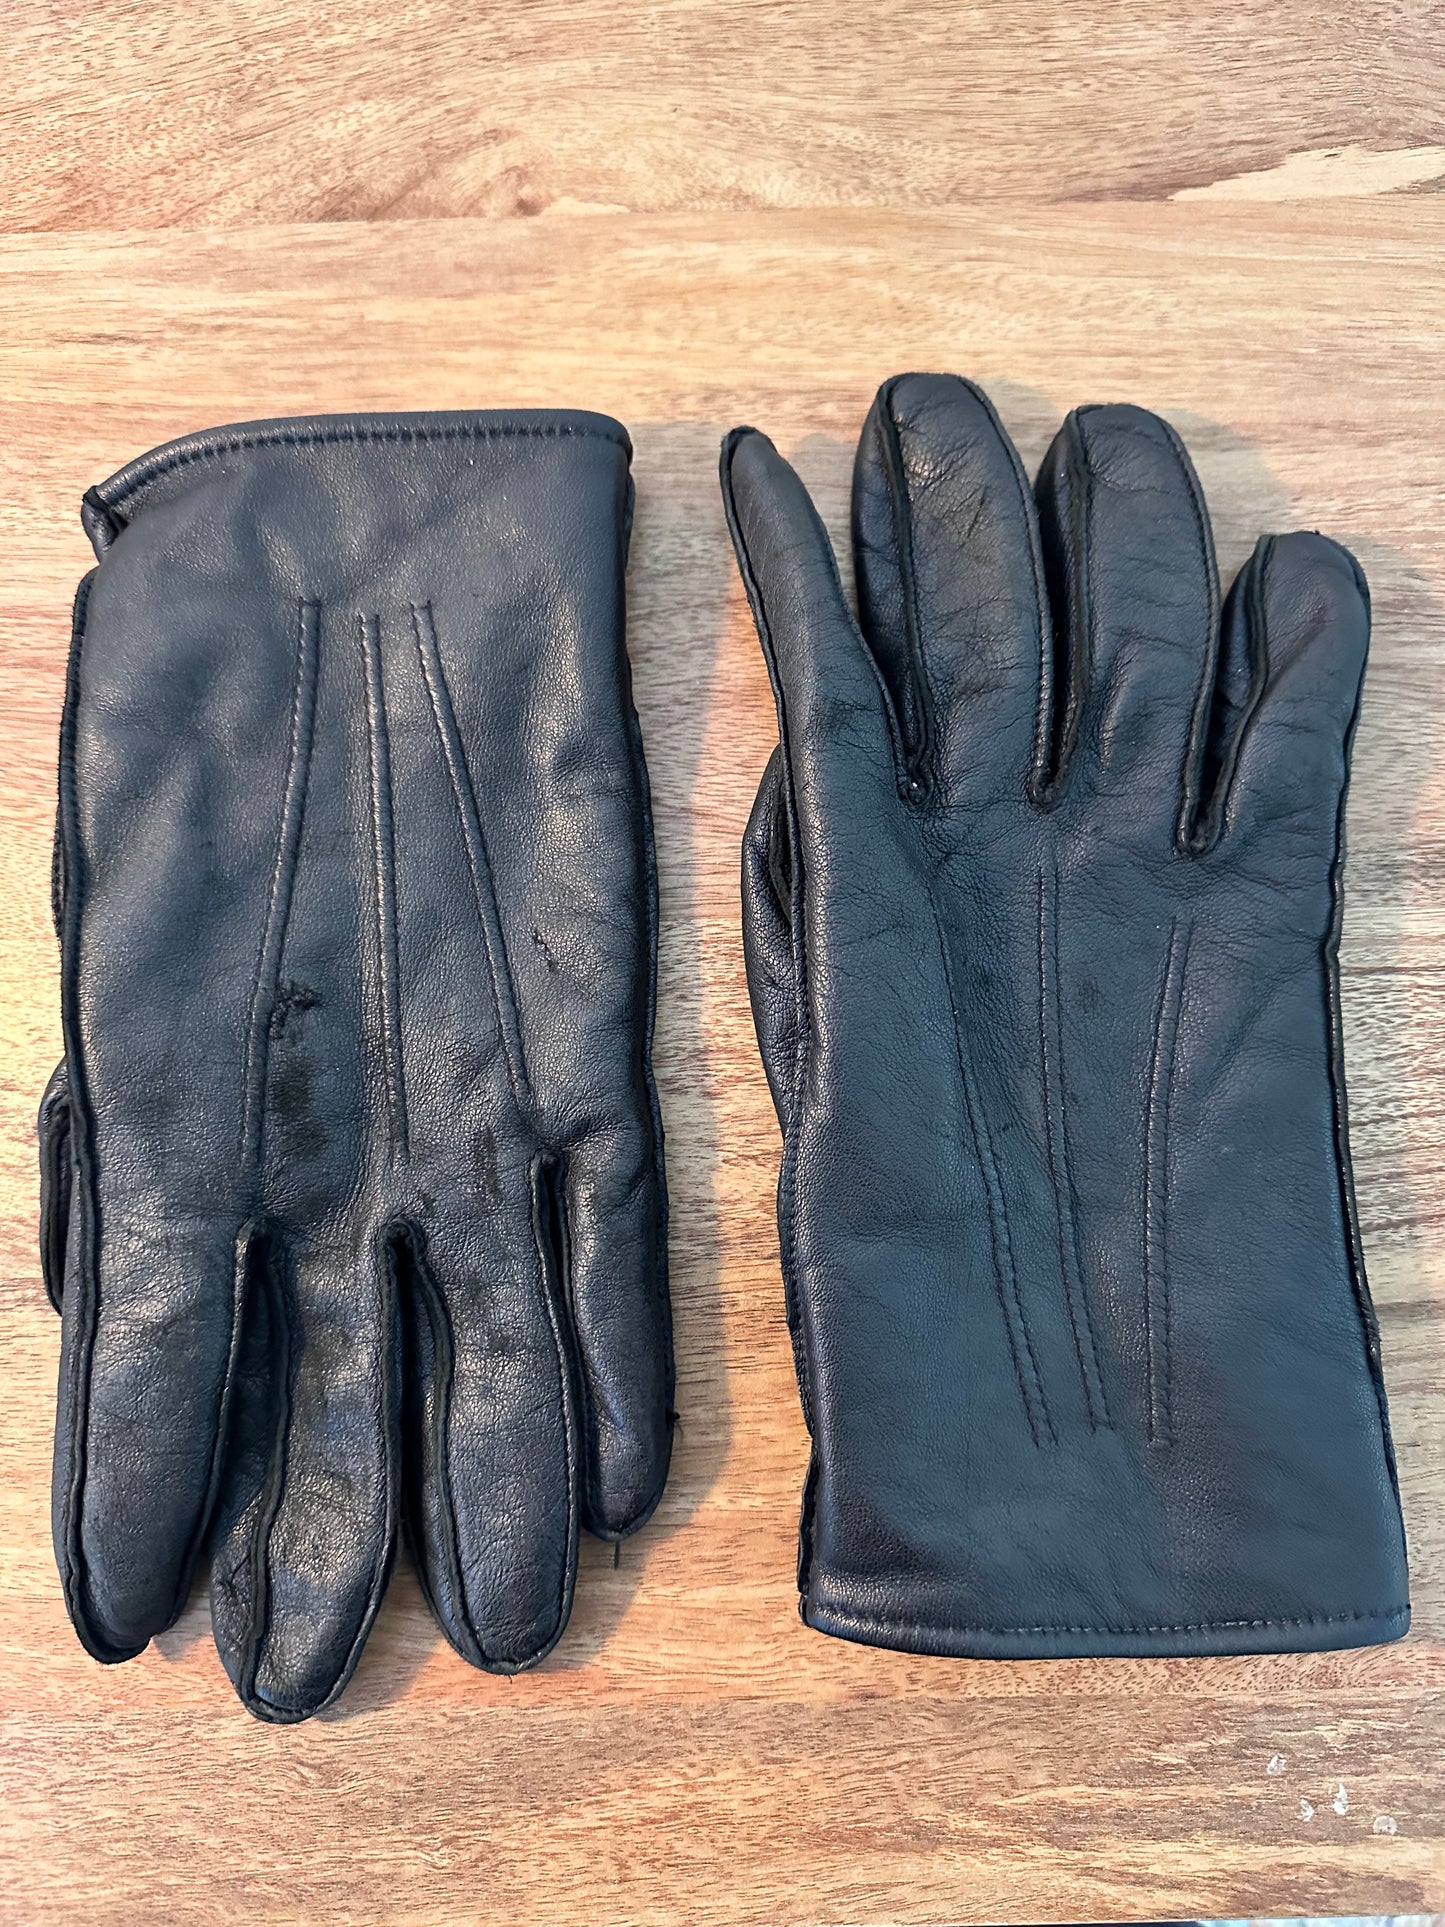 THE OFFICE: Jim's Black Leather Gloves